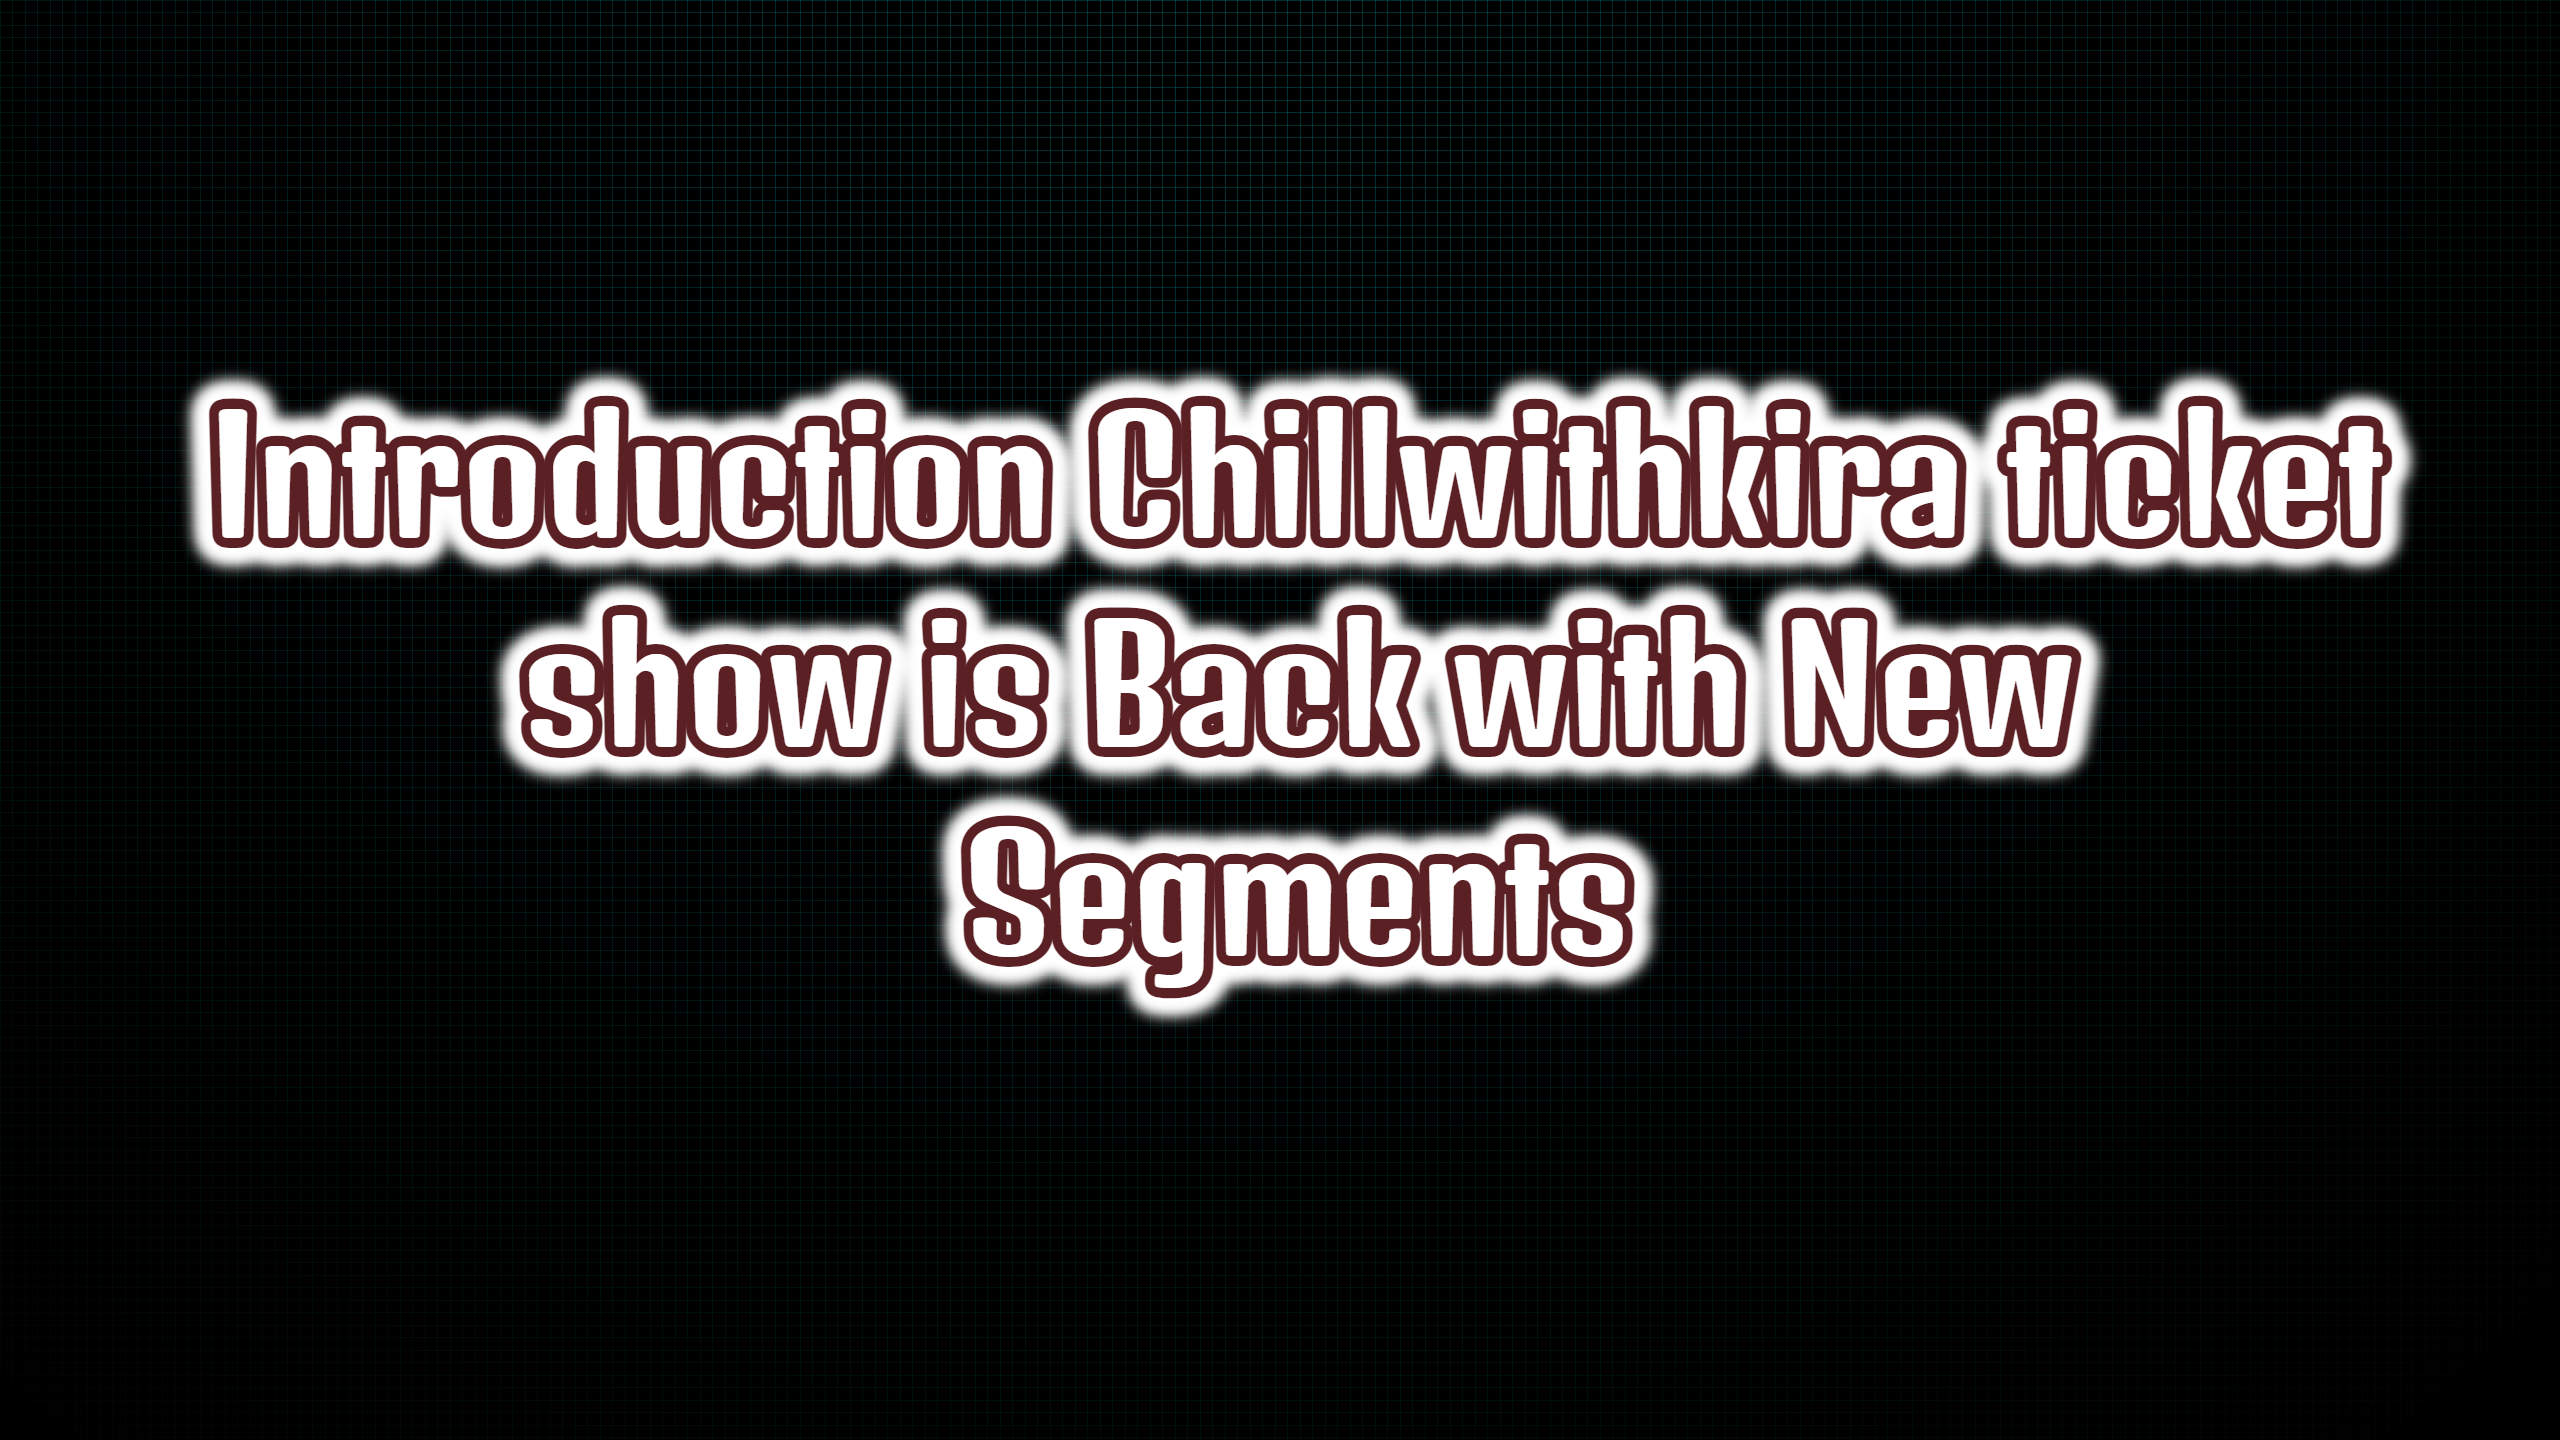 Introduction Chillwithkira ticket show is Back with New Segments